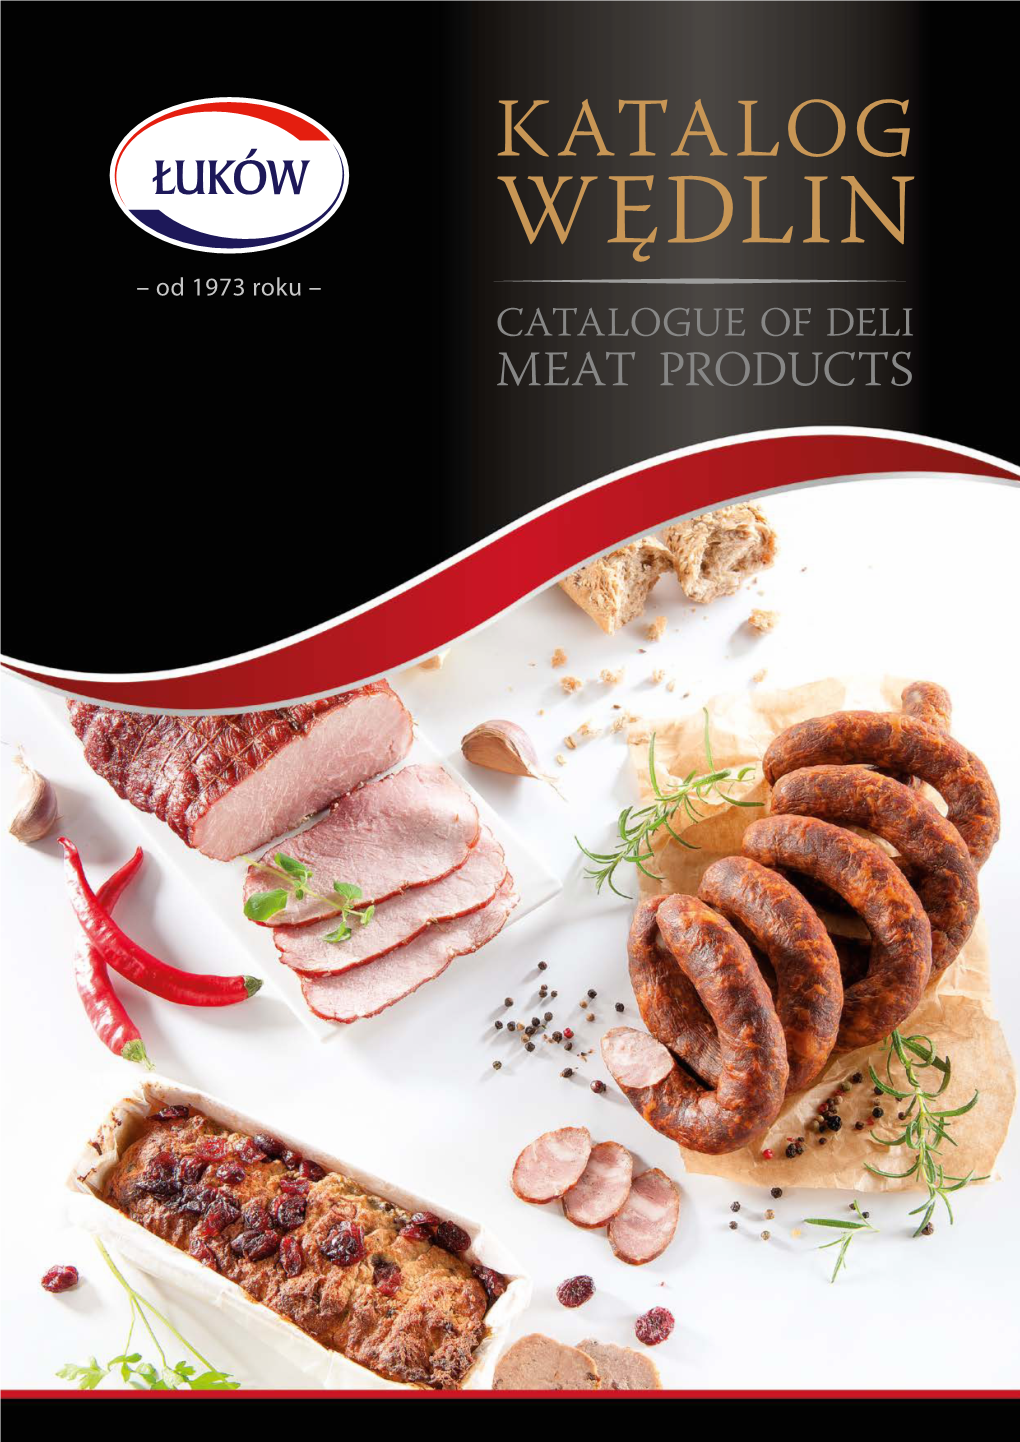 KATALOG WĘDLIN – Od 1973 Roku – CATALOGUE of DELI MEAT PRODUCTS Ponad 40 Lat Tradycji More Than 40 Years of Tradition